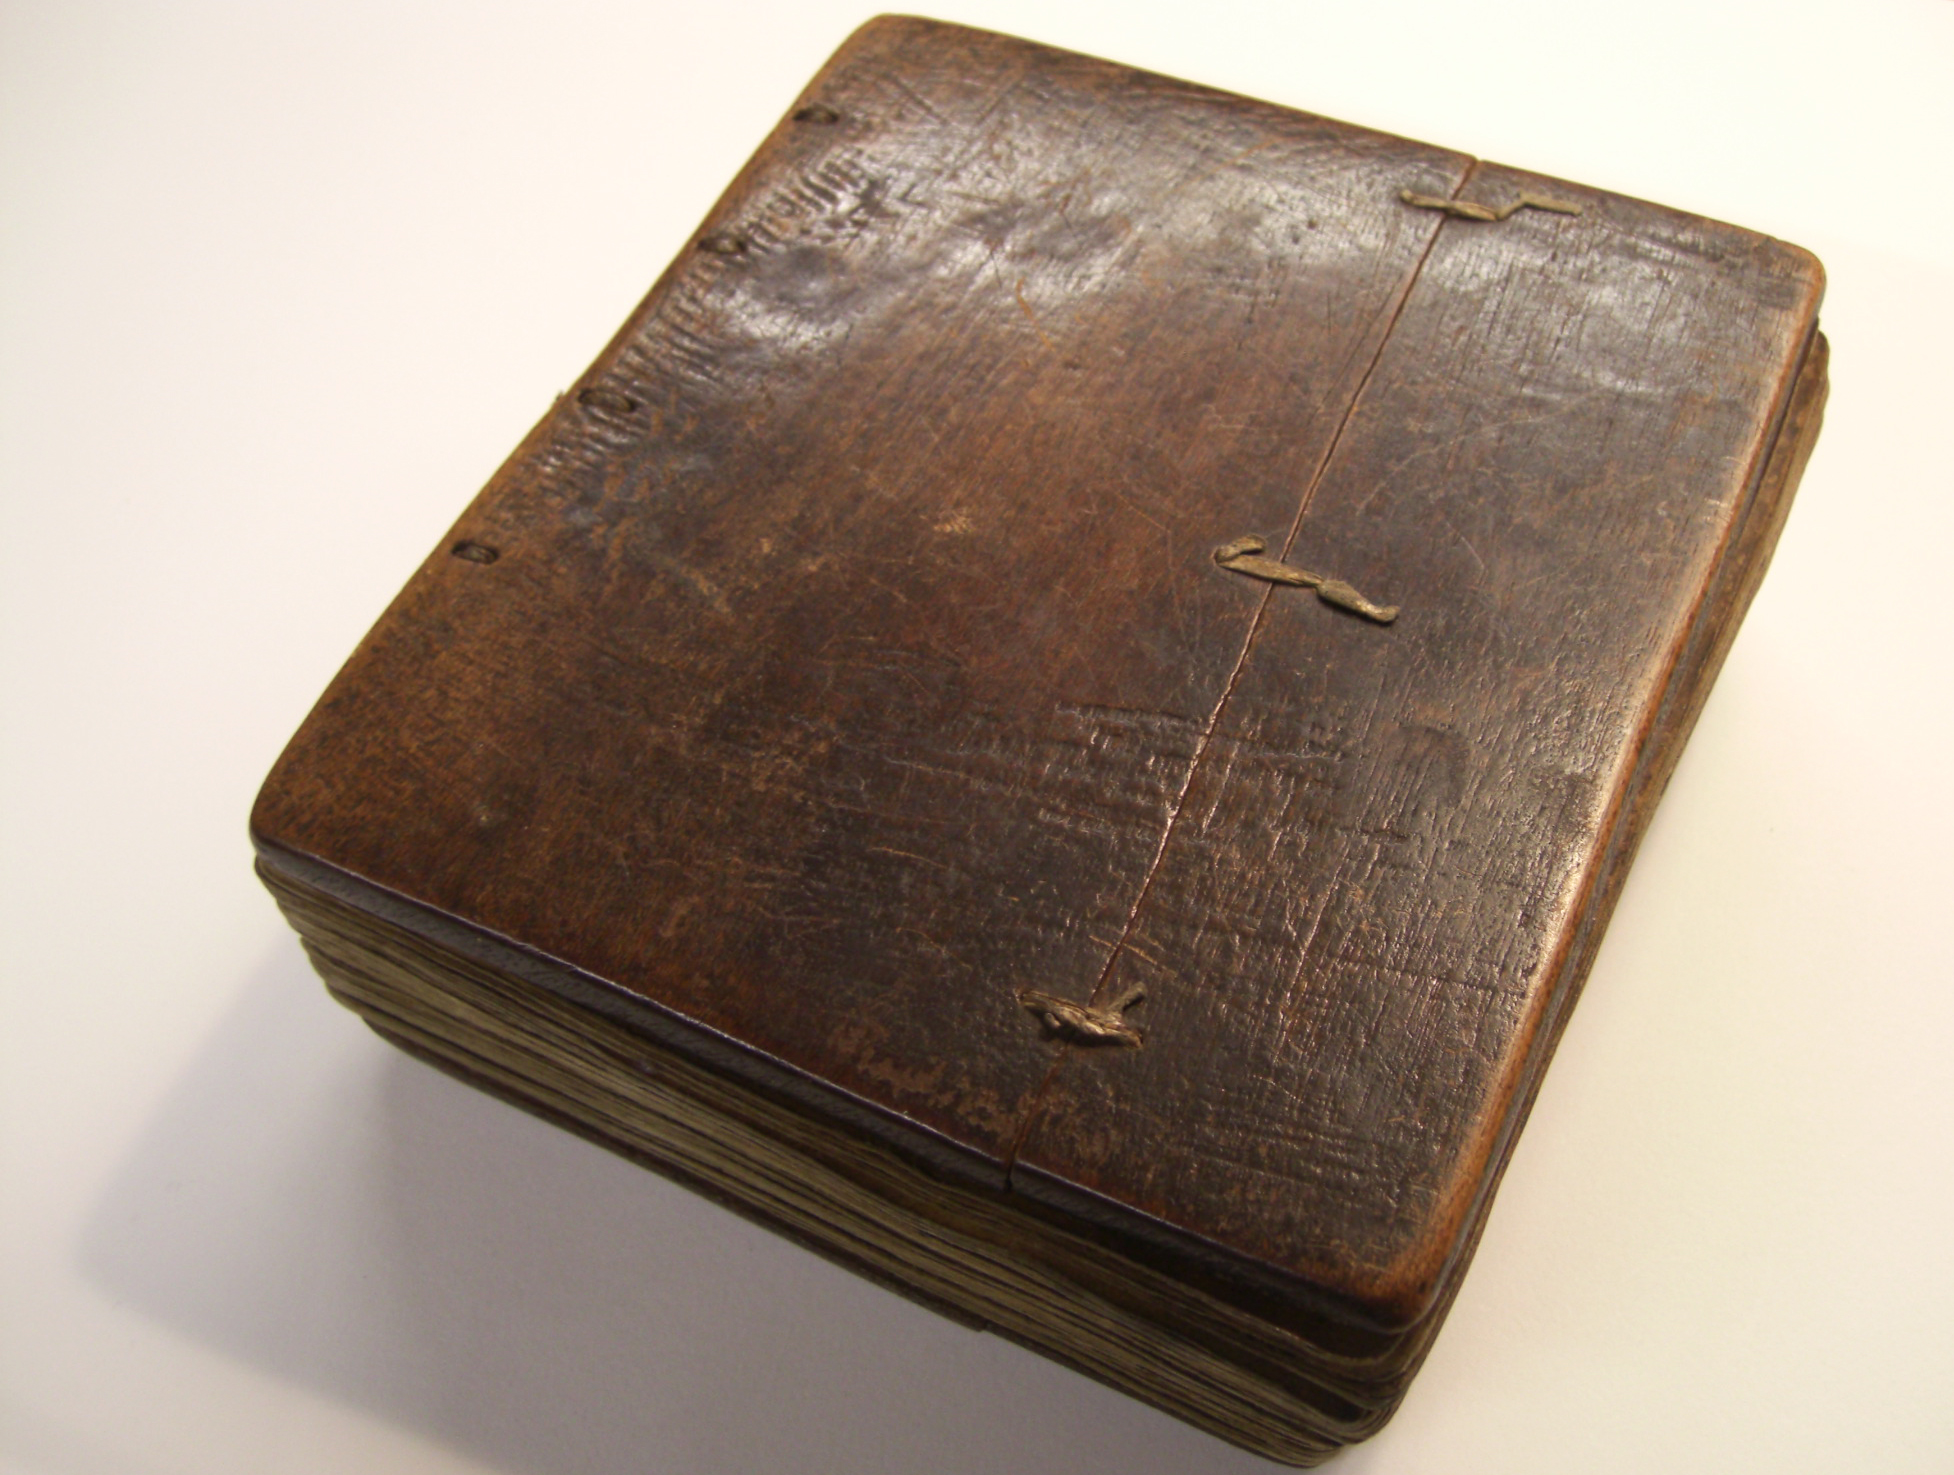 Wooden front cover of an 18th century Ethiopian psalter (St Andrews ms38900)